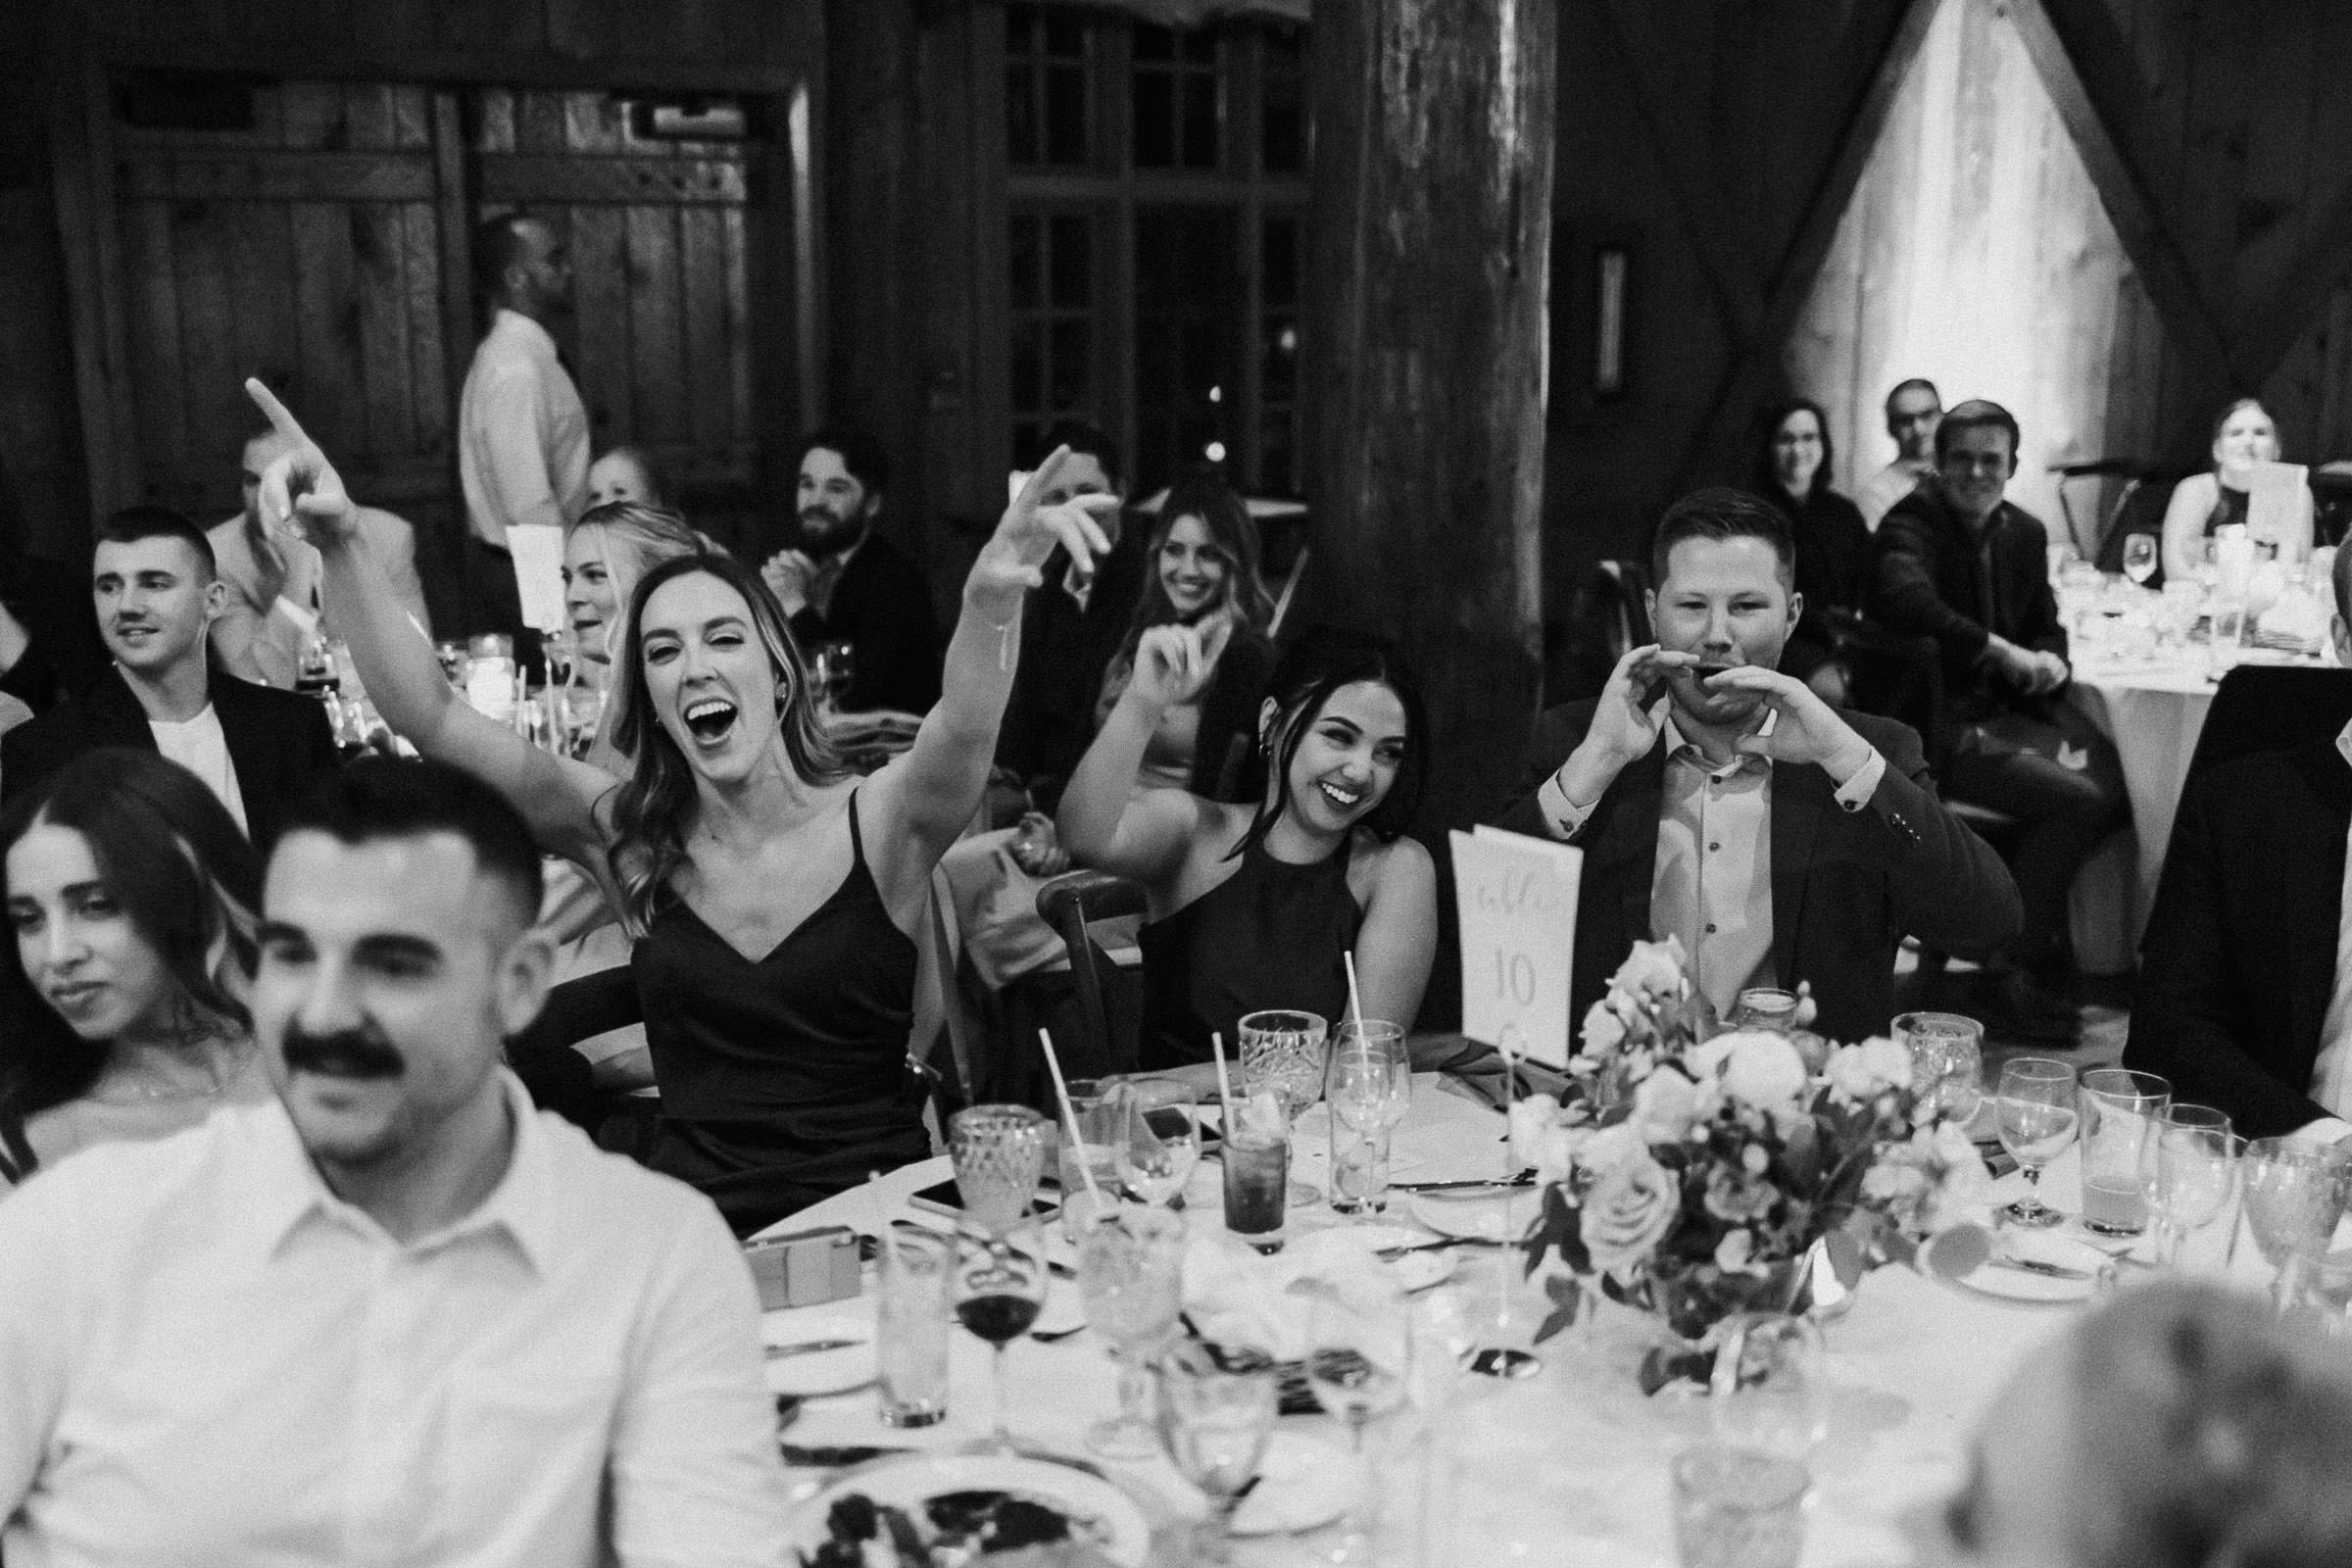 Guests cheer during toasts